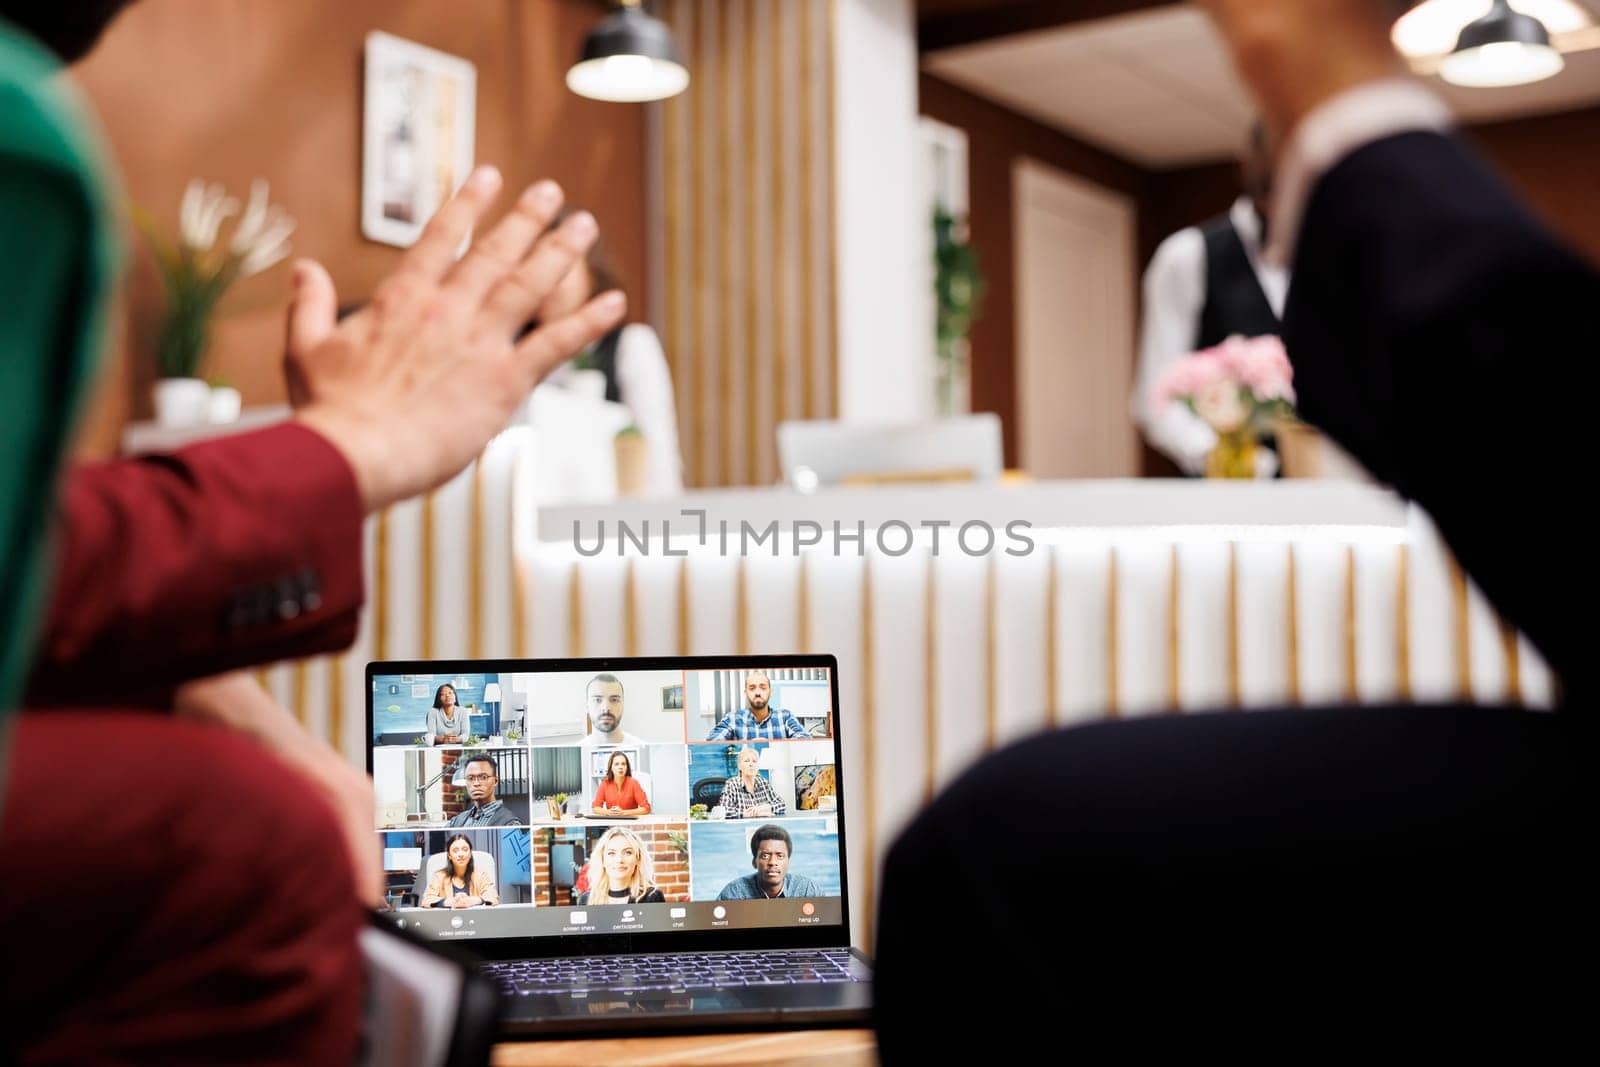 Two employees using videocall remote while they wait for room to be ready, attending business meeting teleconference. Entrepreneur talking to colleagues in hotel lobby, telework.